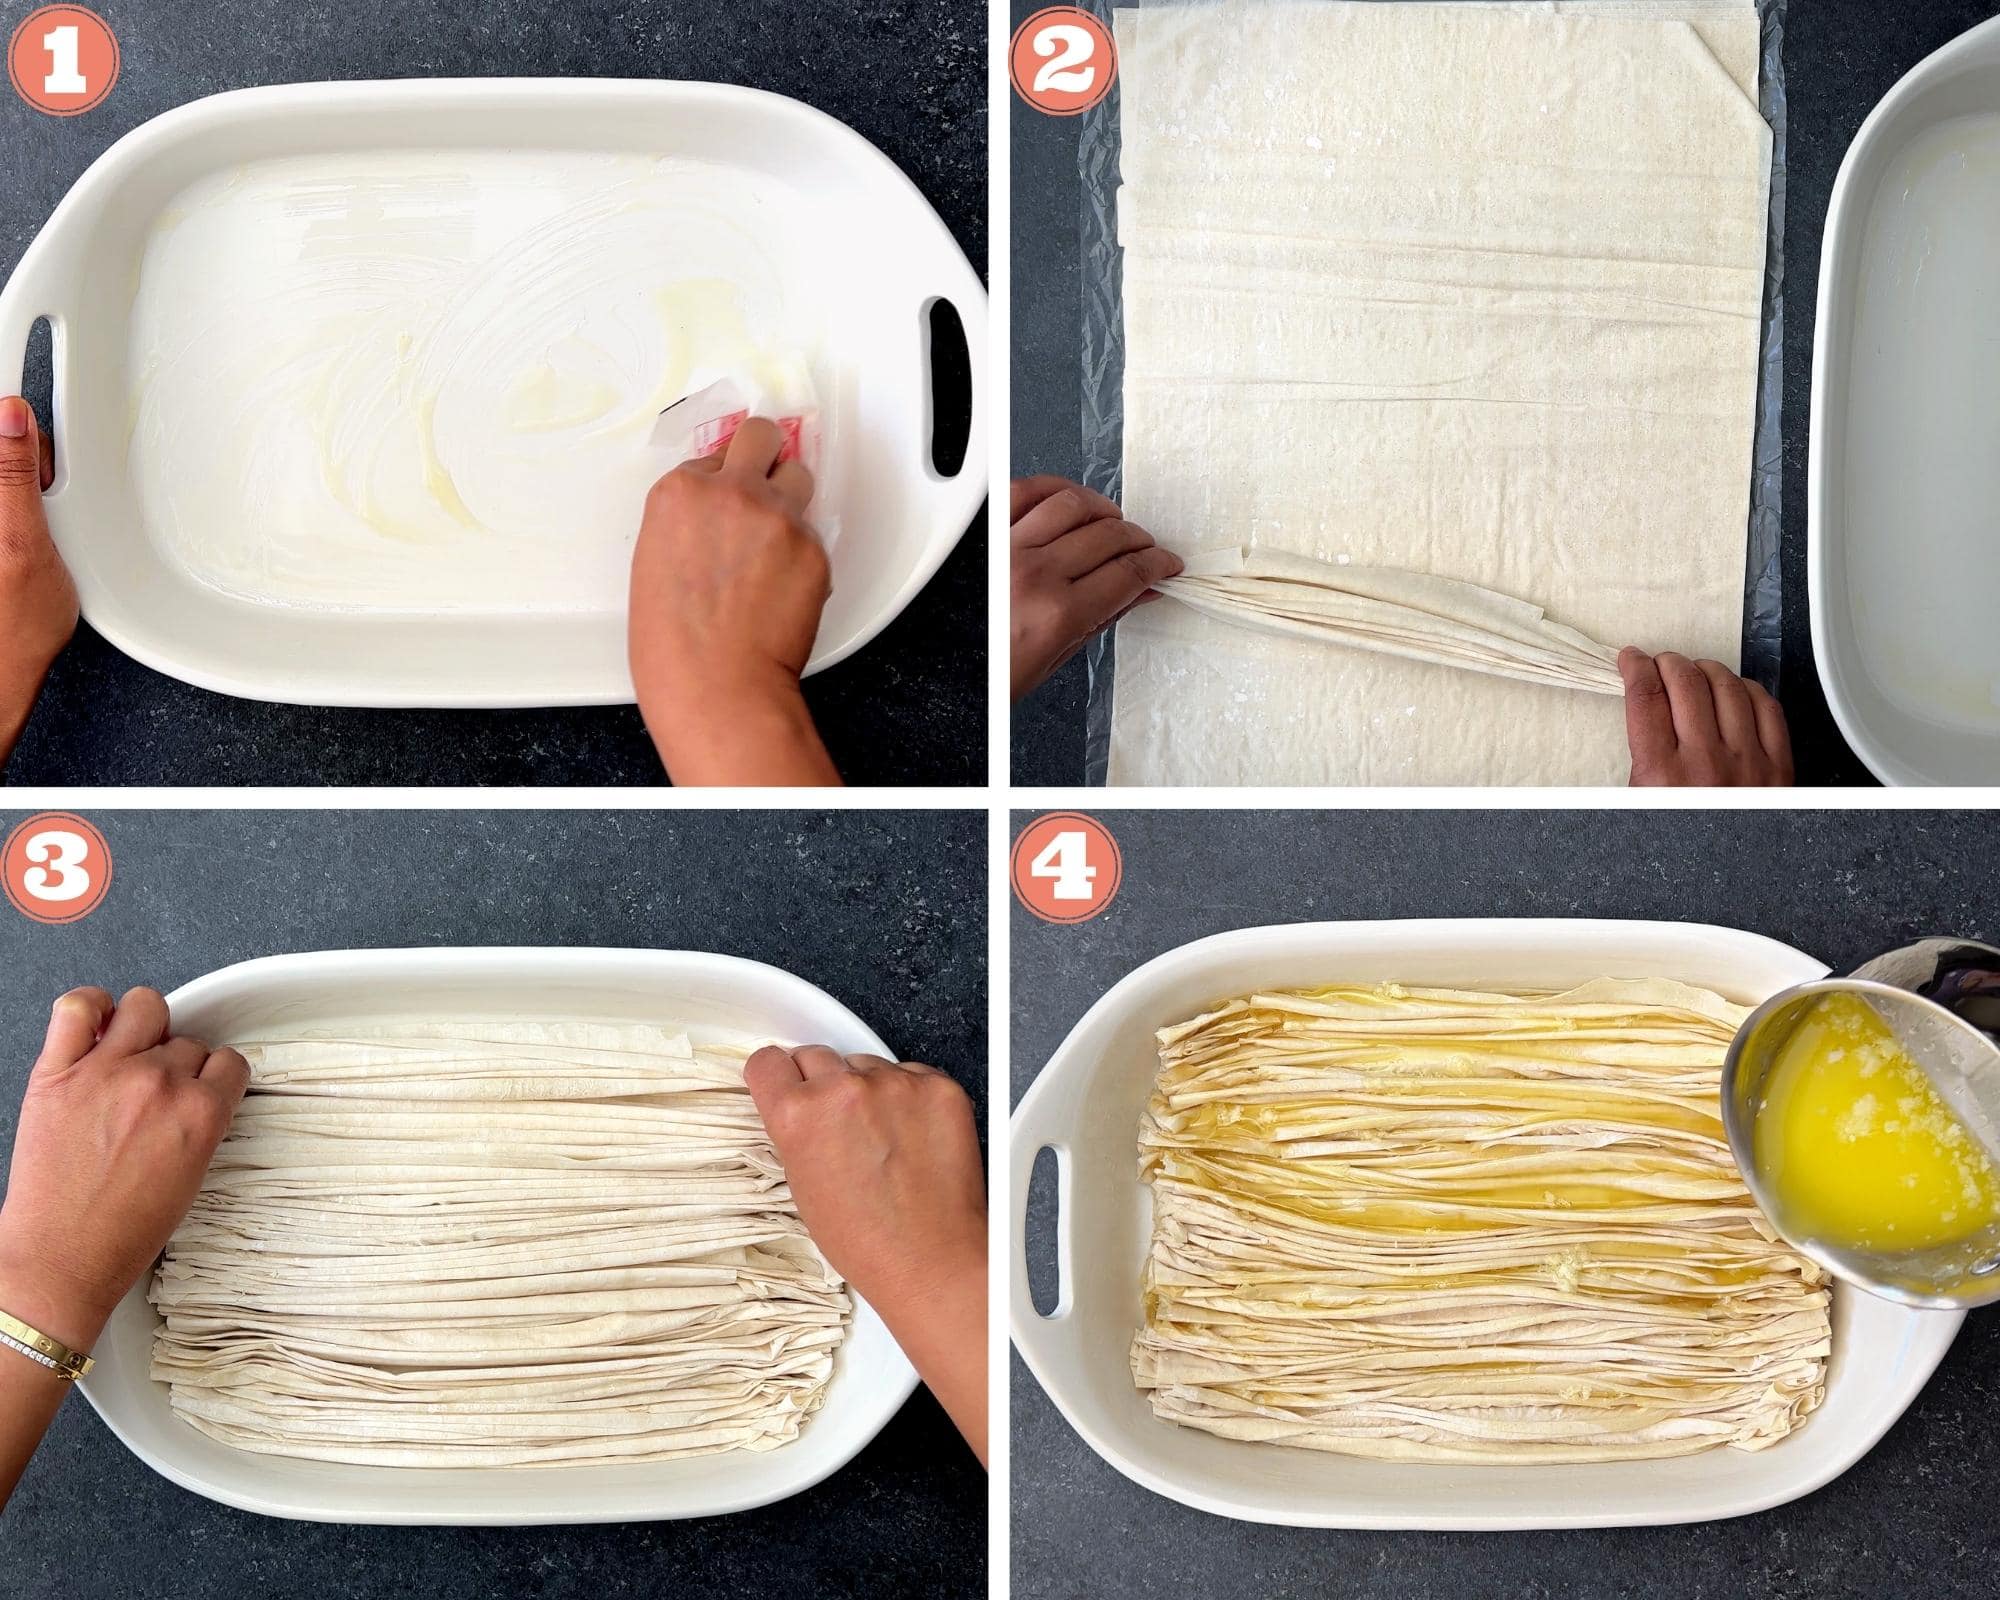 Steps 1-4 showing buttering, crinkling and baking phyllo sheets in pan